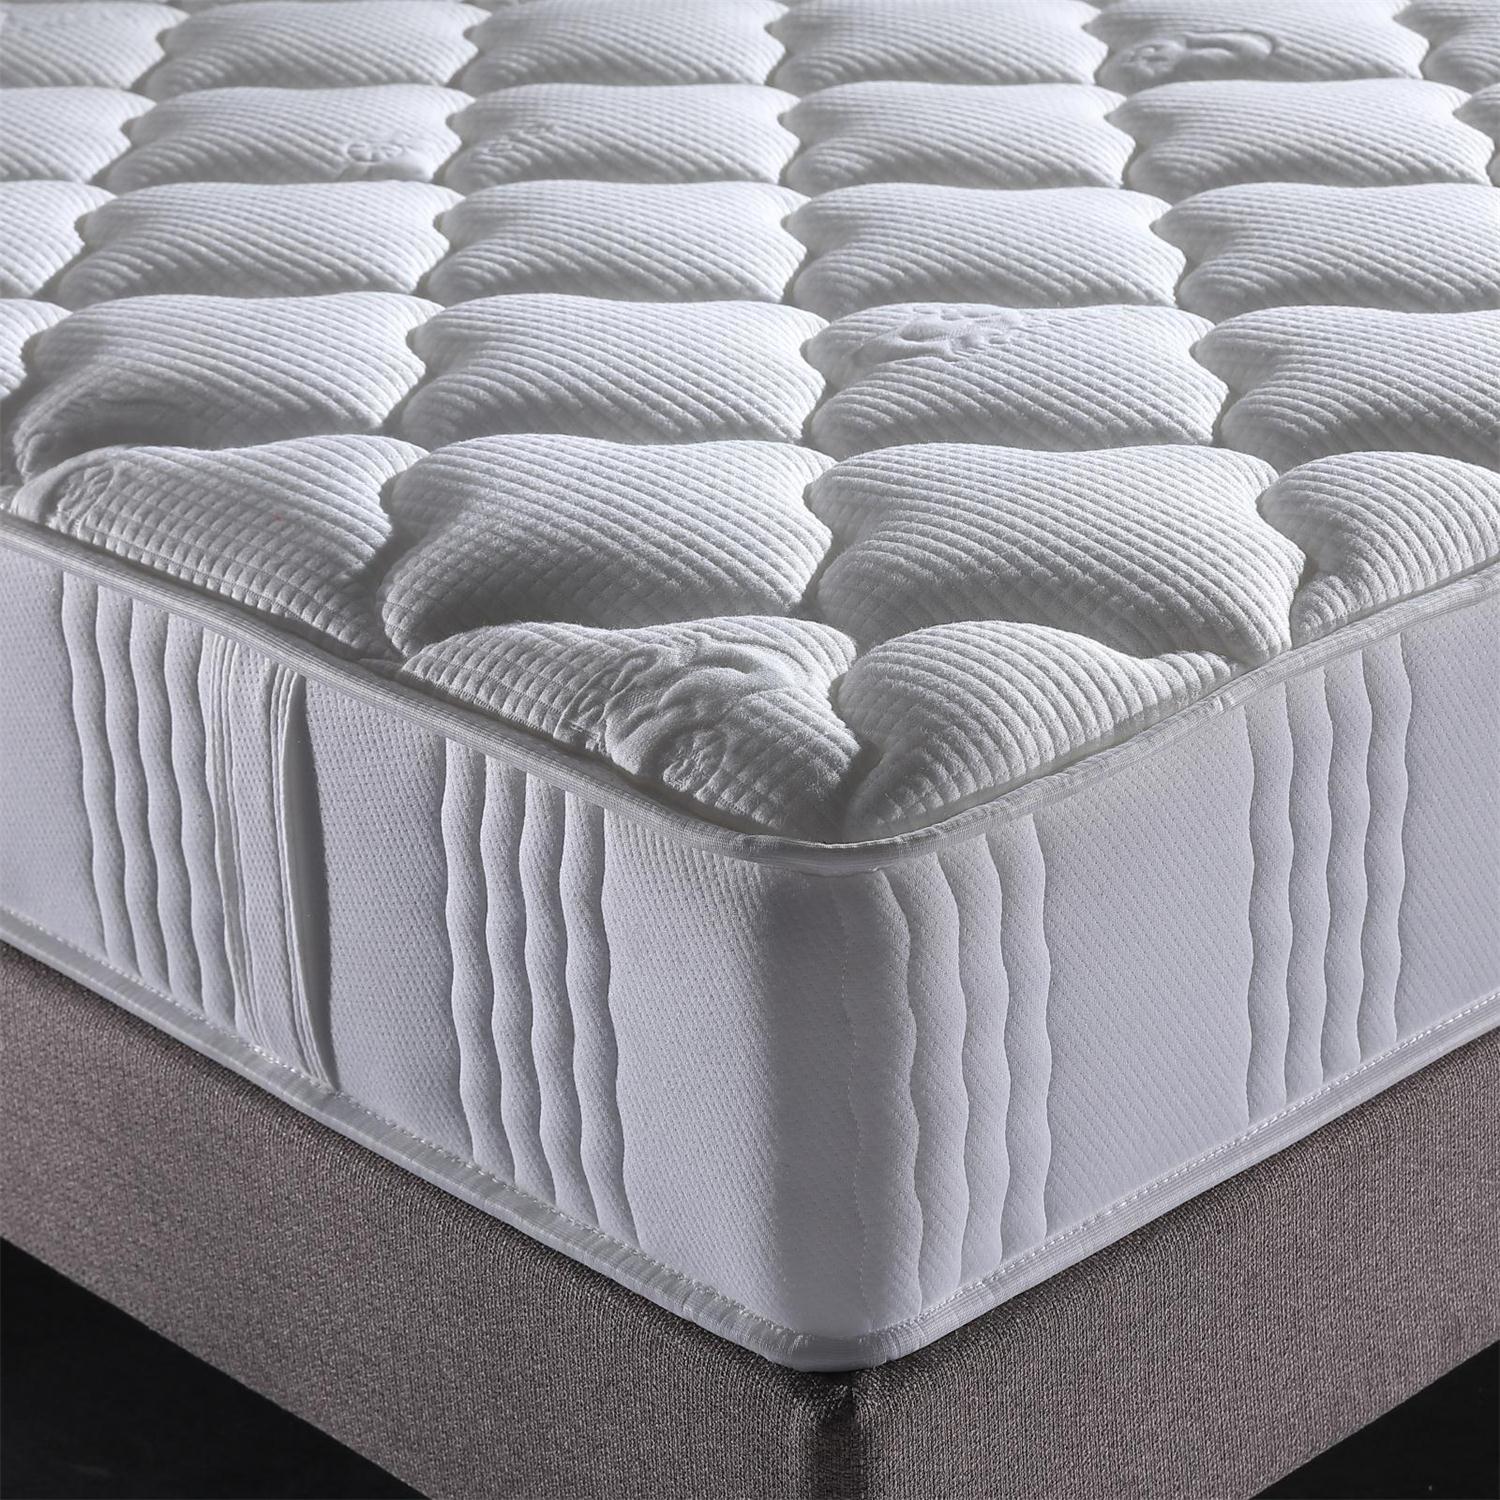 Fansace 21PA-01 Hotel Pocket Coil Queen Mattress With Full Size